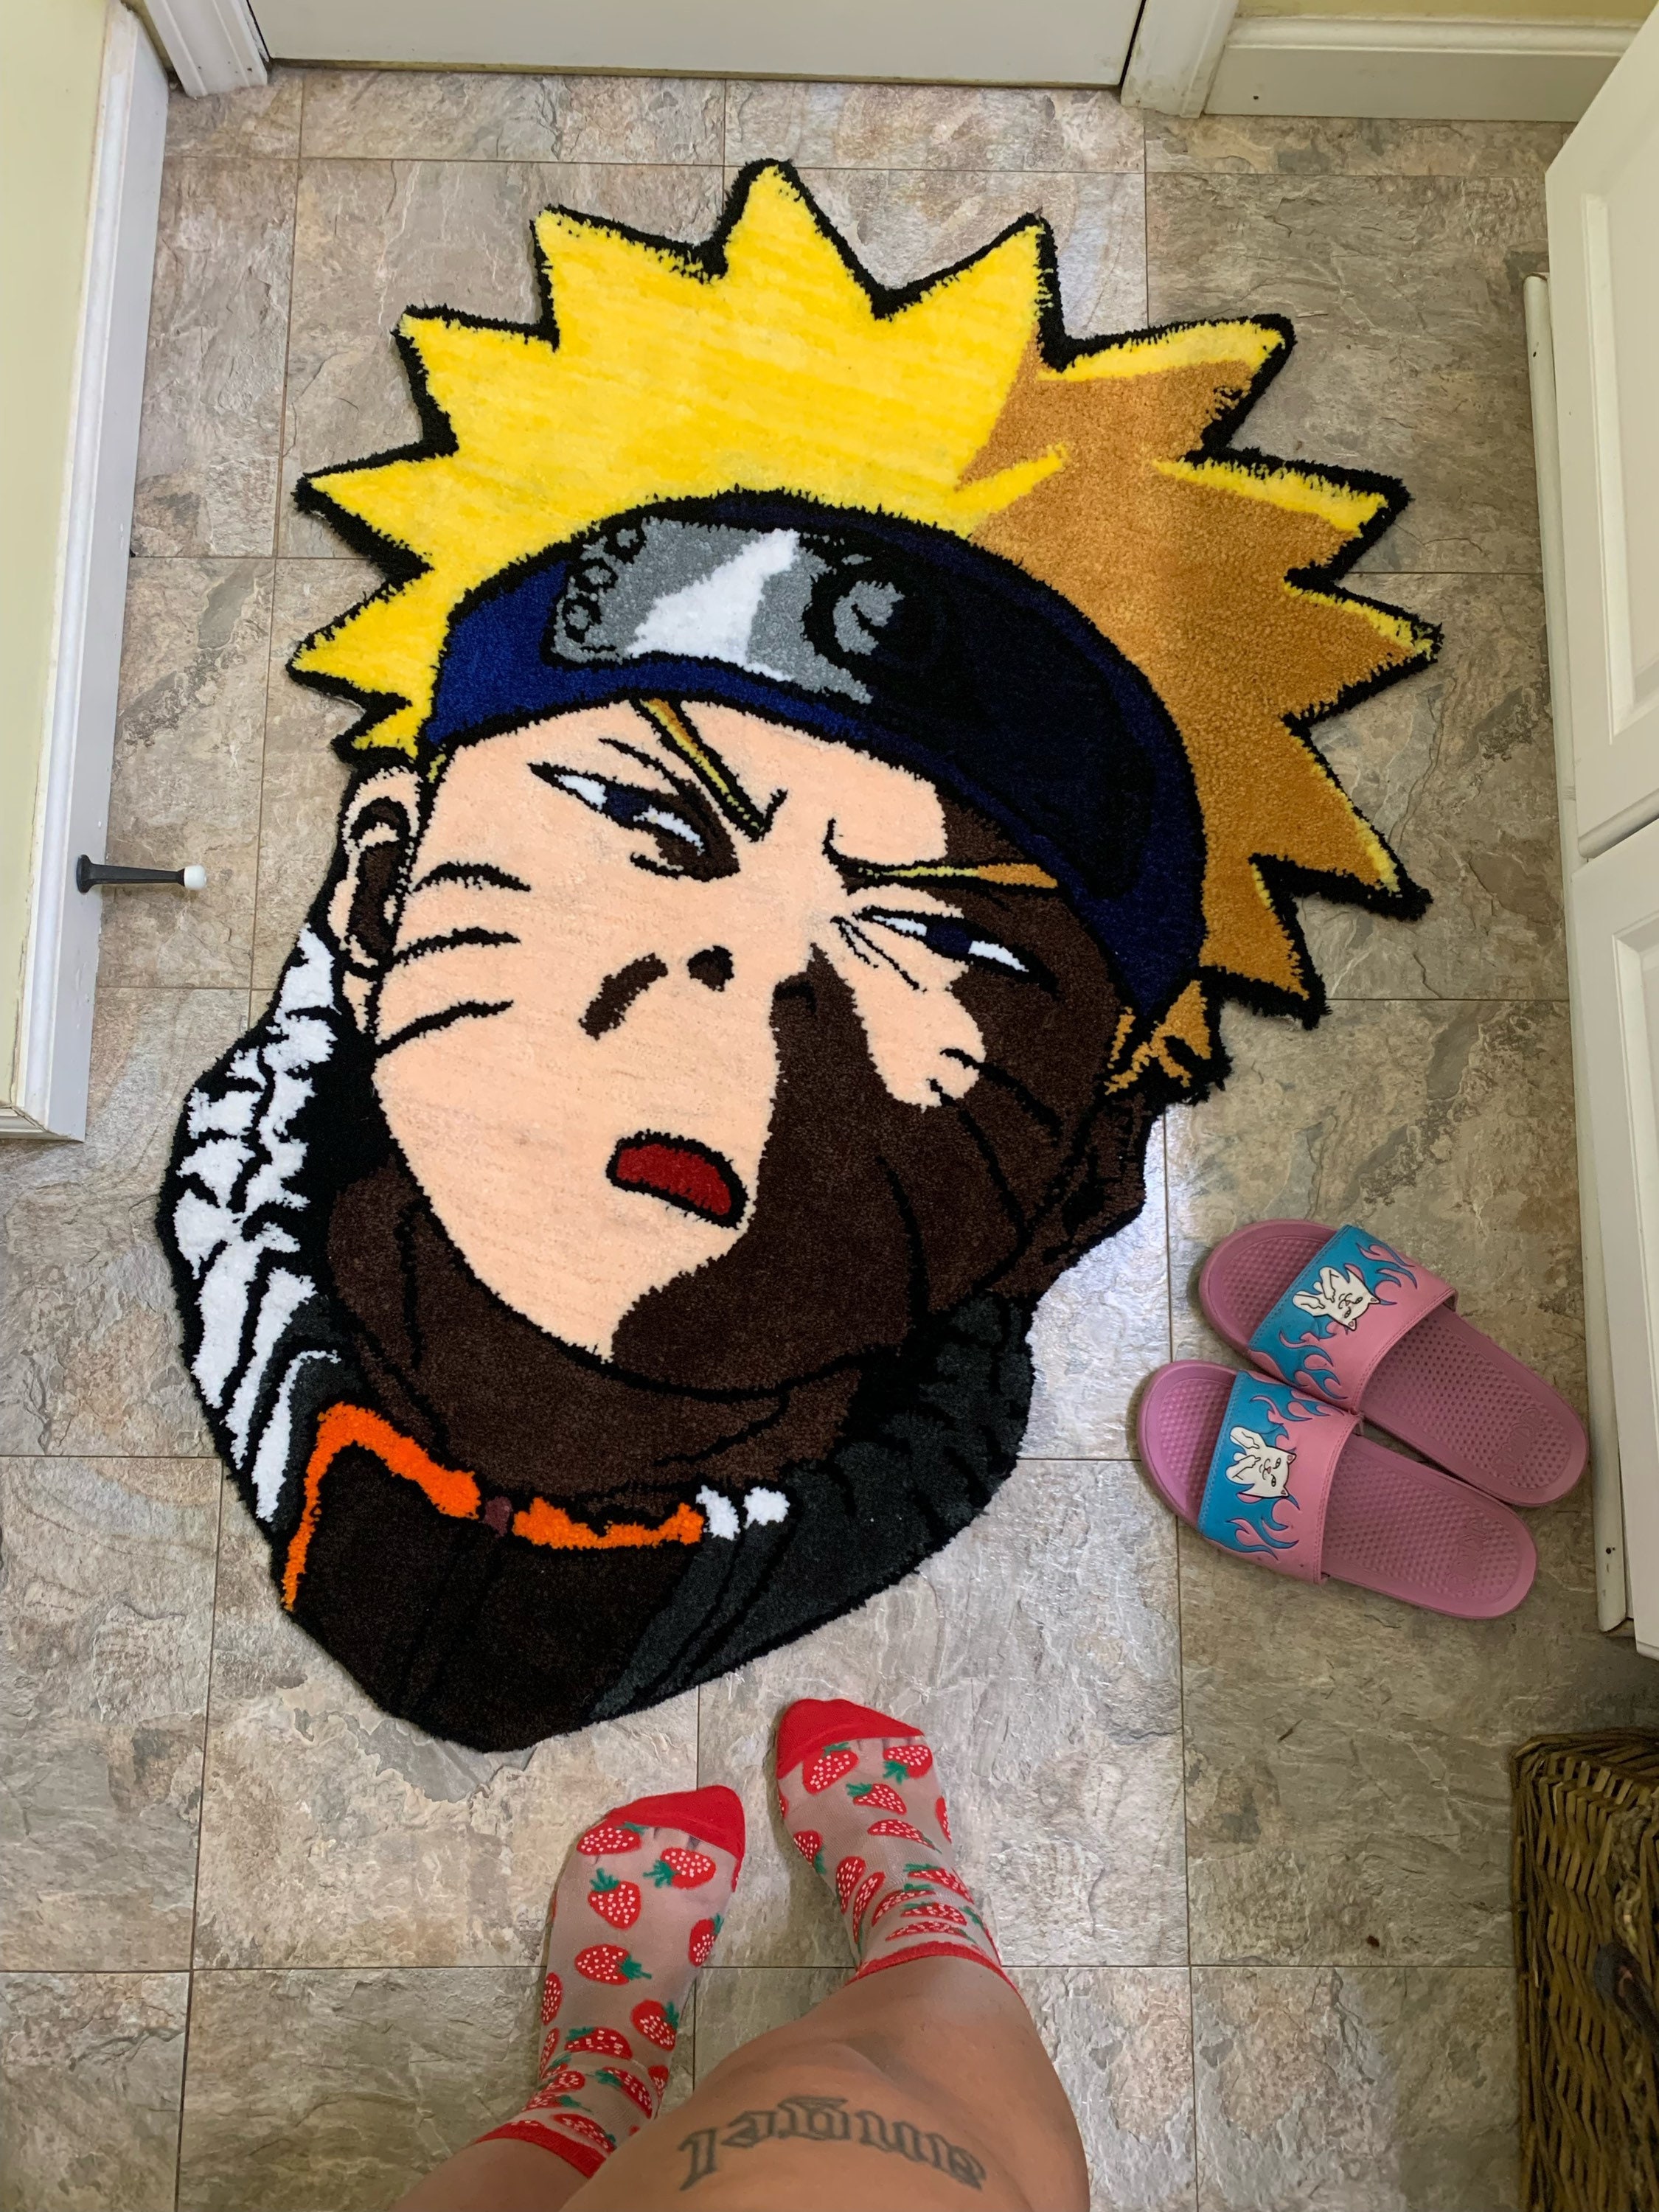 Custom Anime Rugs  Character Rugs  Get 10 Off On First Order